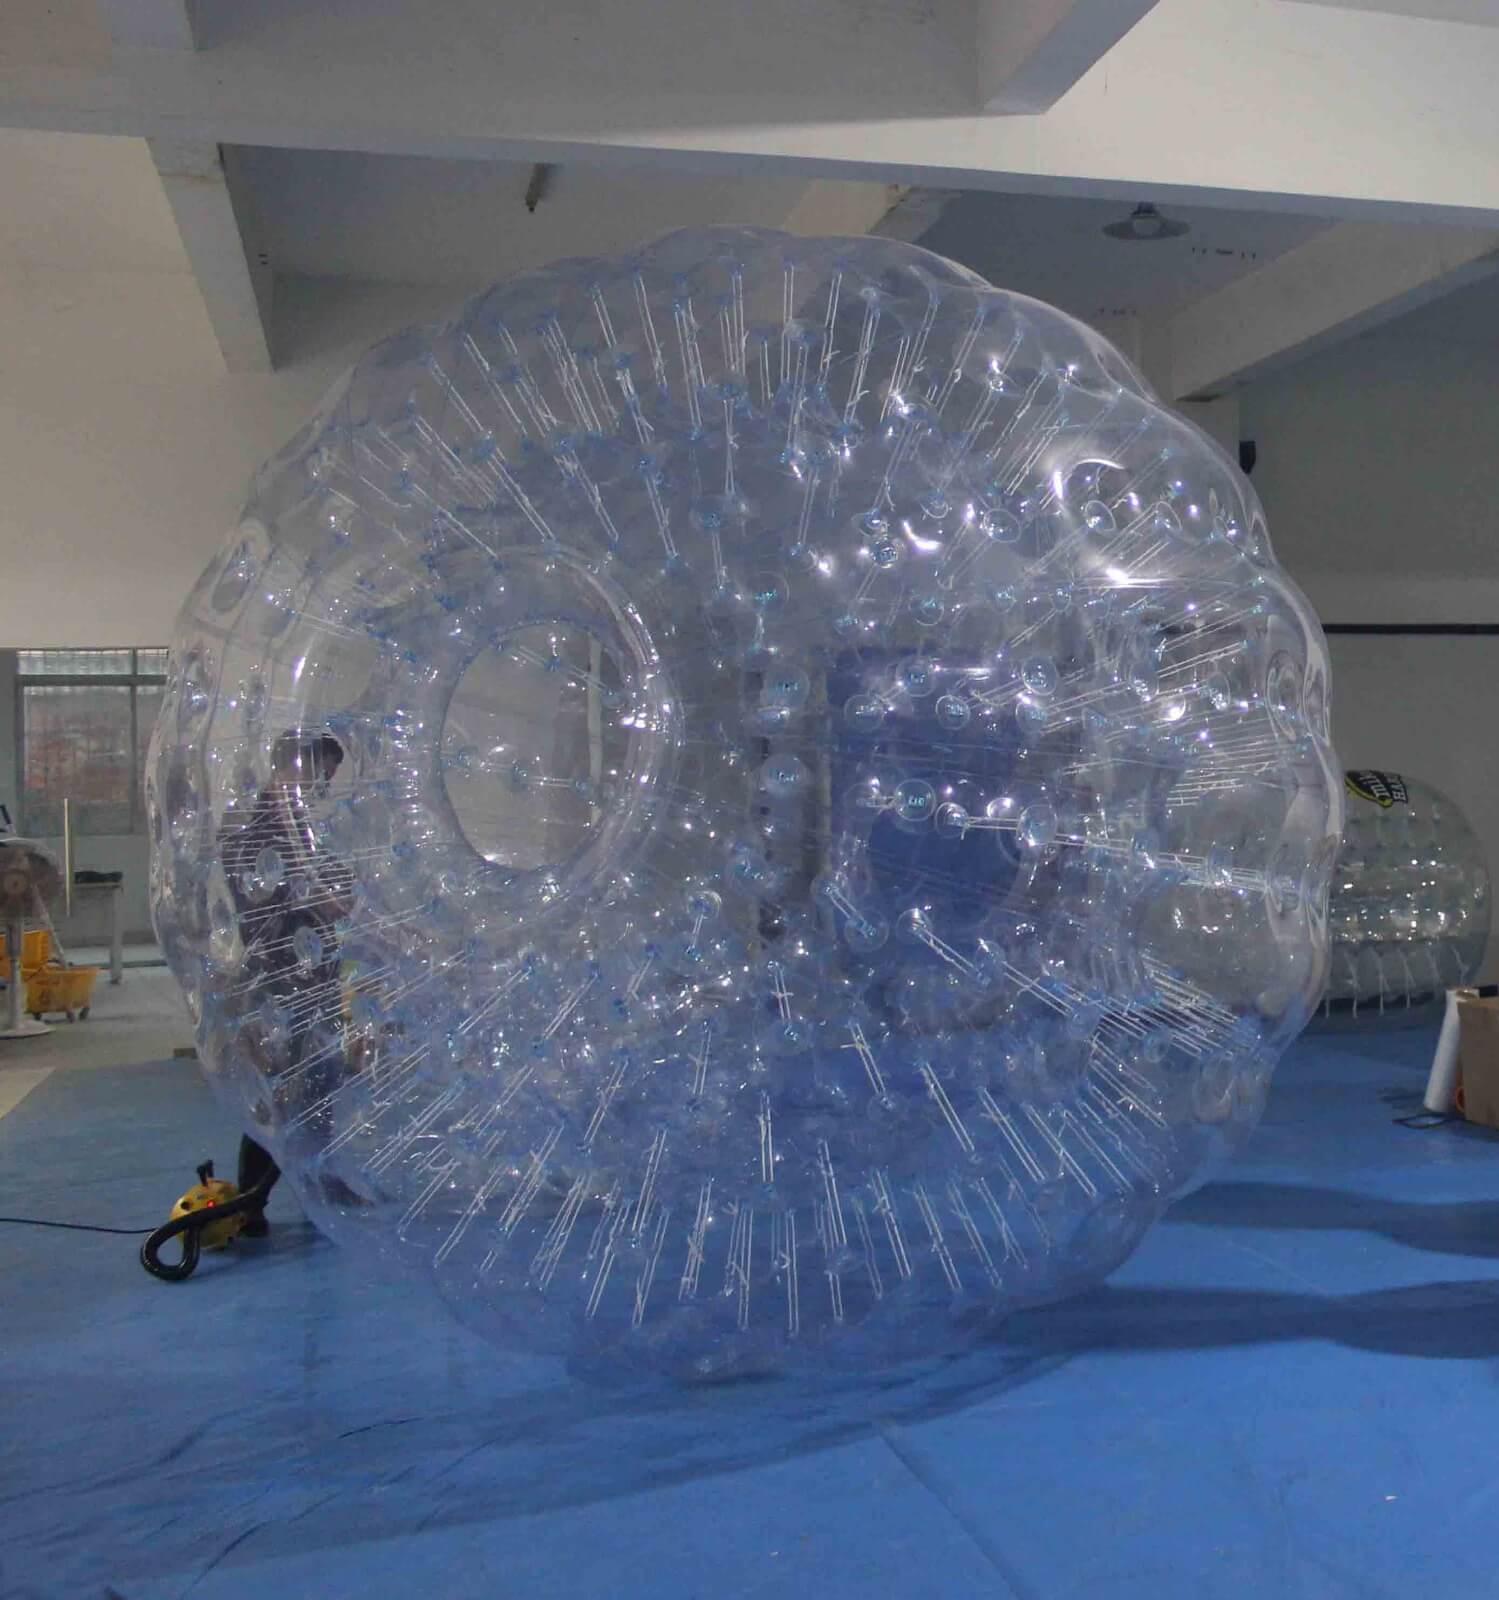 Buy Bubble Football Suits, Zorb Soccer and Bumper Balls – Max Leisure